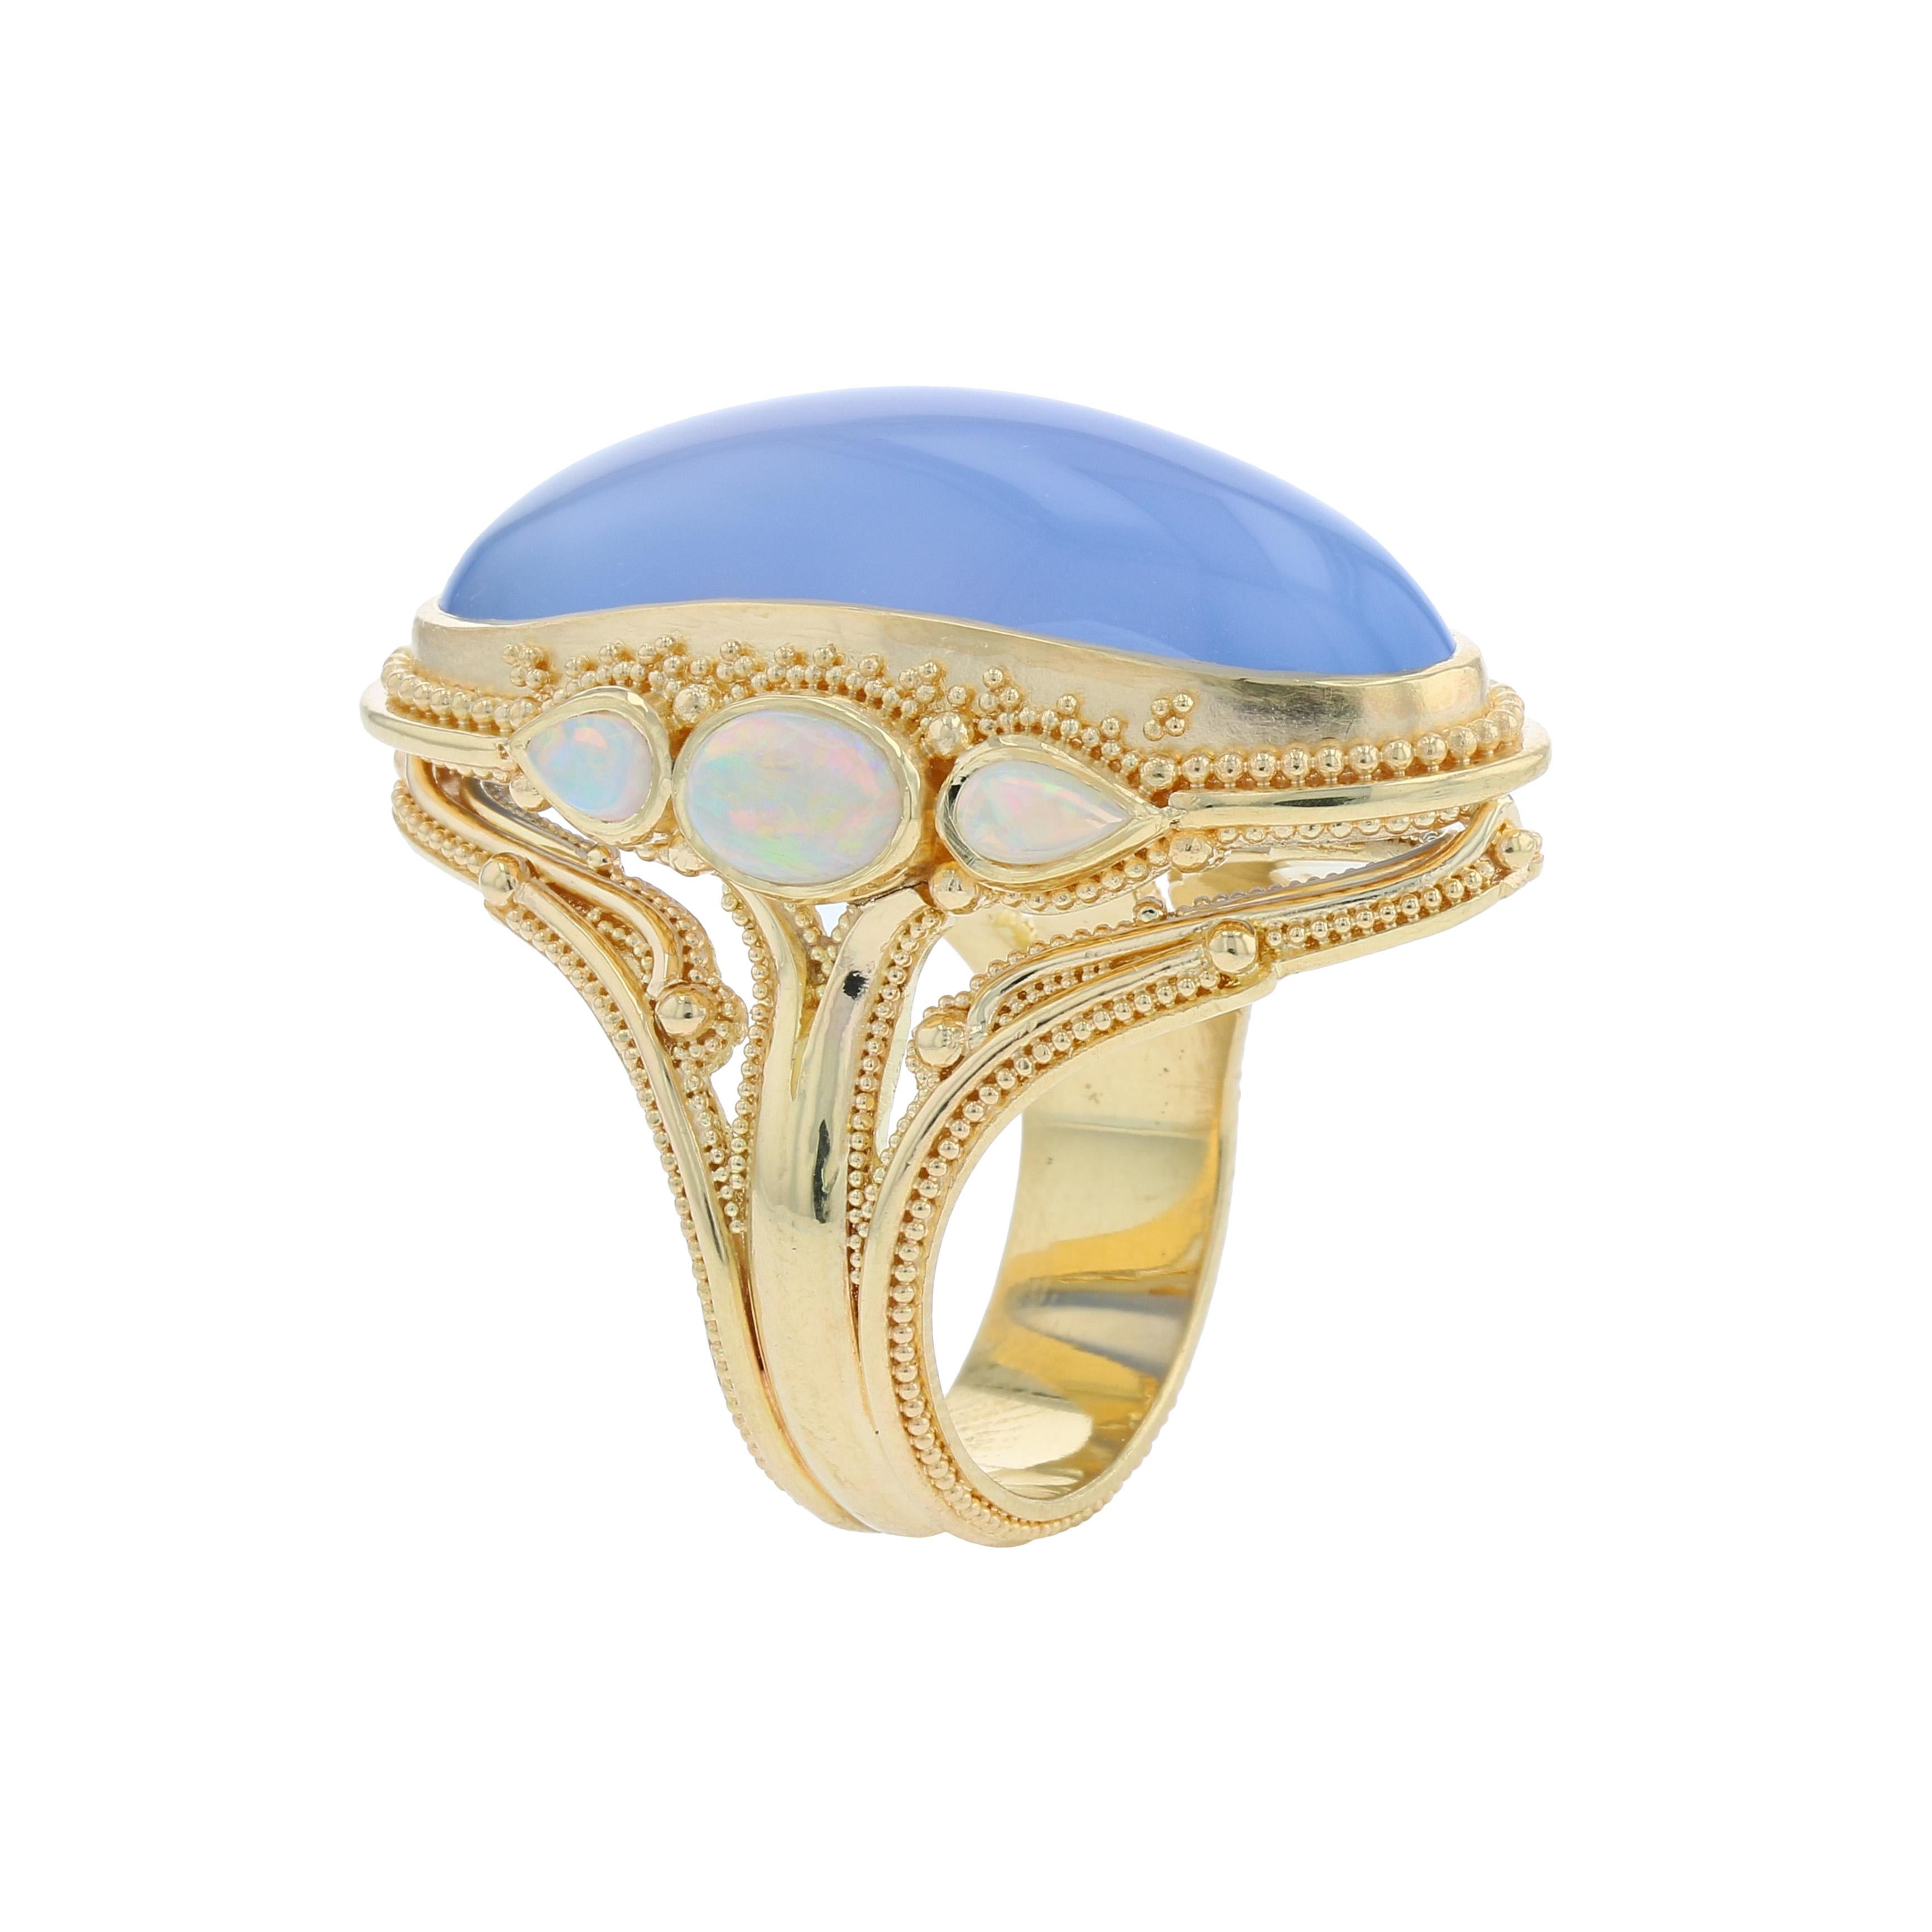 Artisan Kent Raible 18 Karat Gold Chalcedony and Opal Cocktail Ring with Granulation